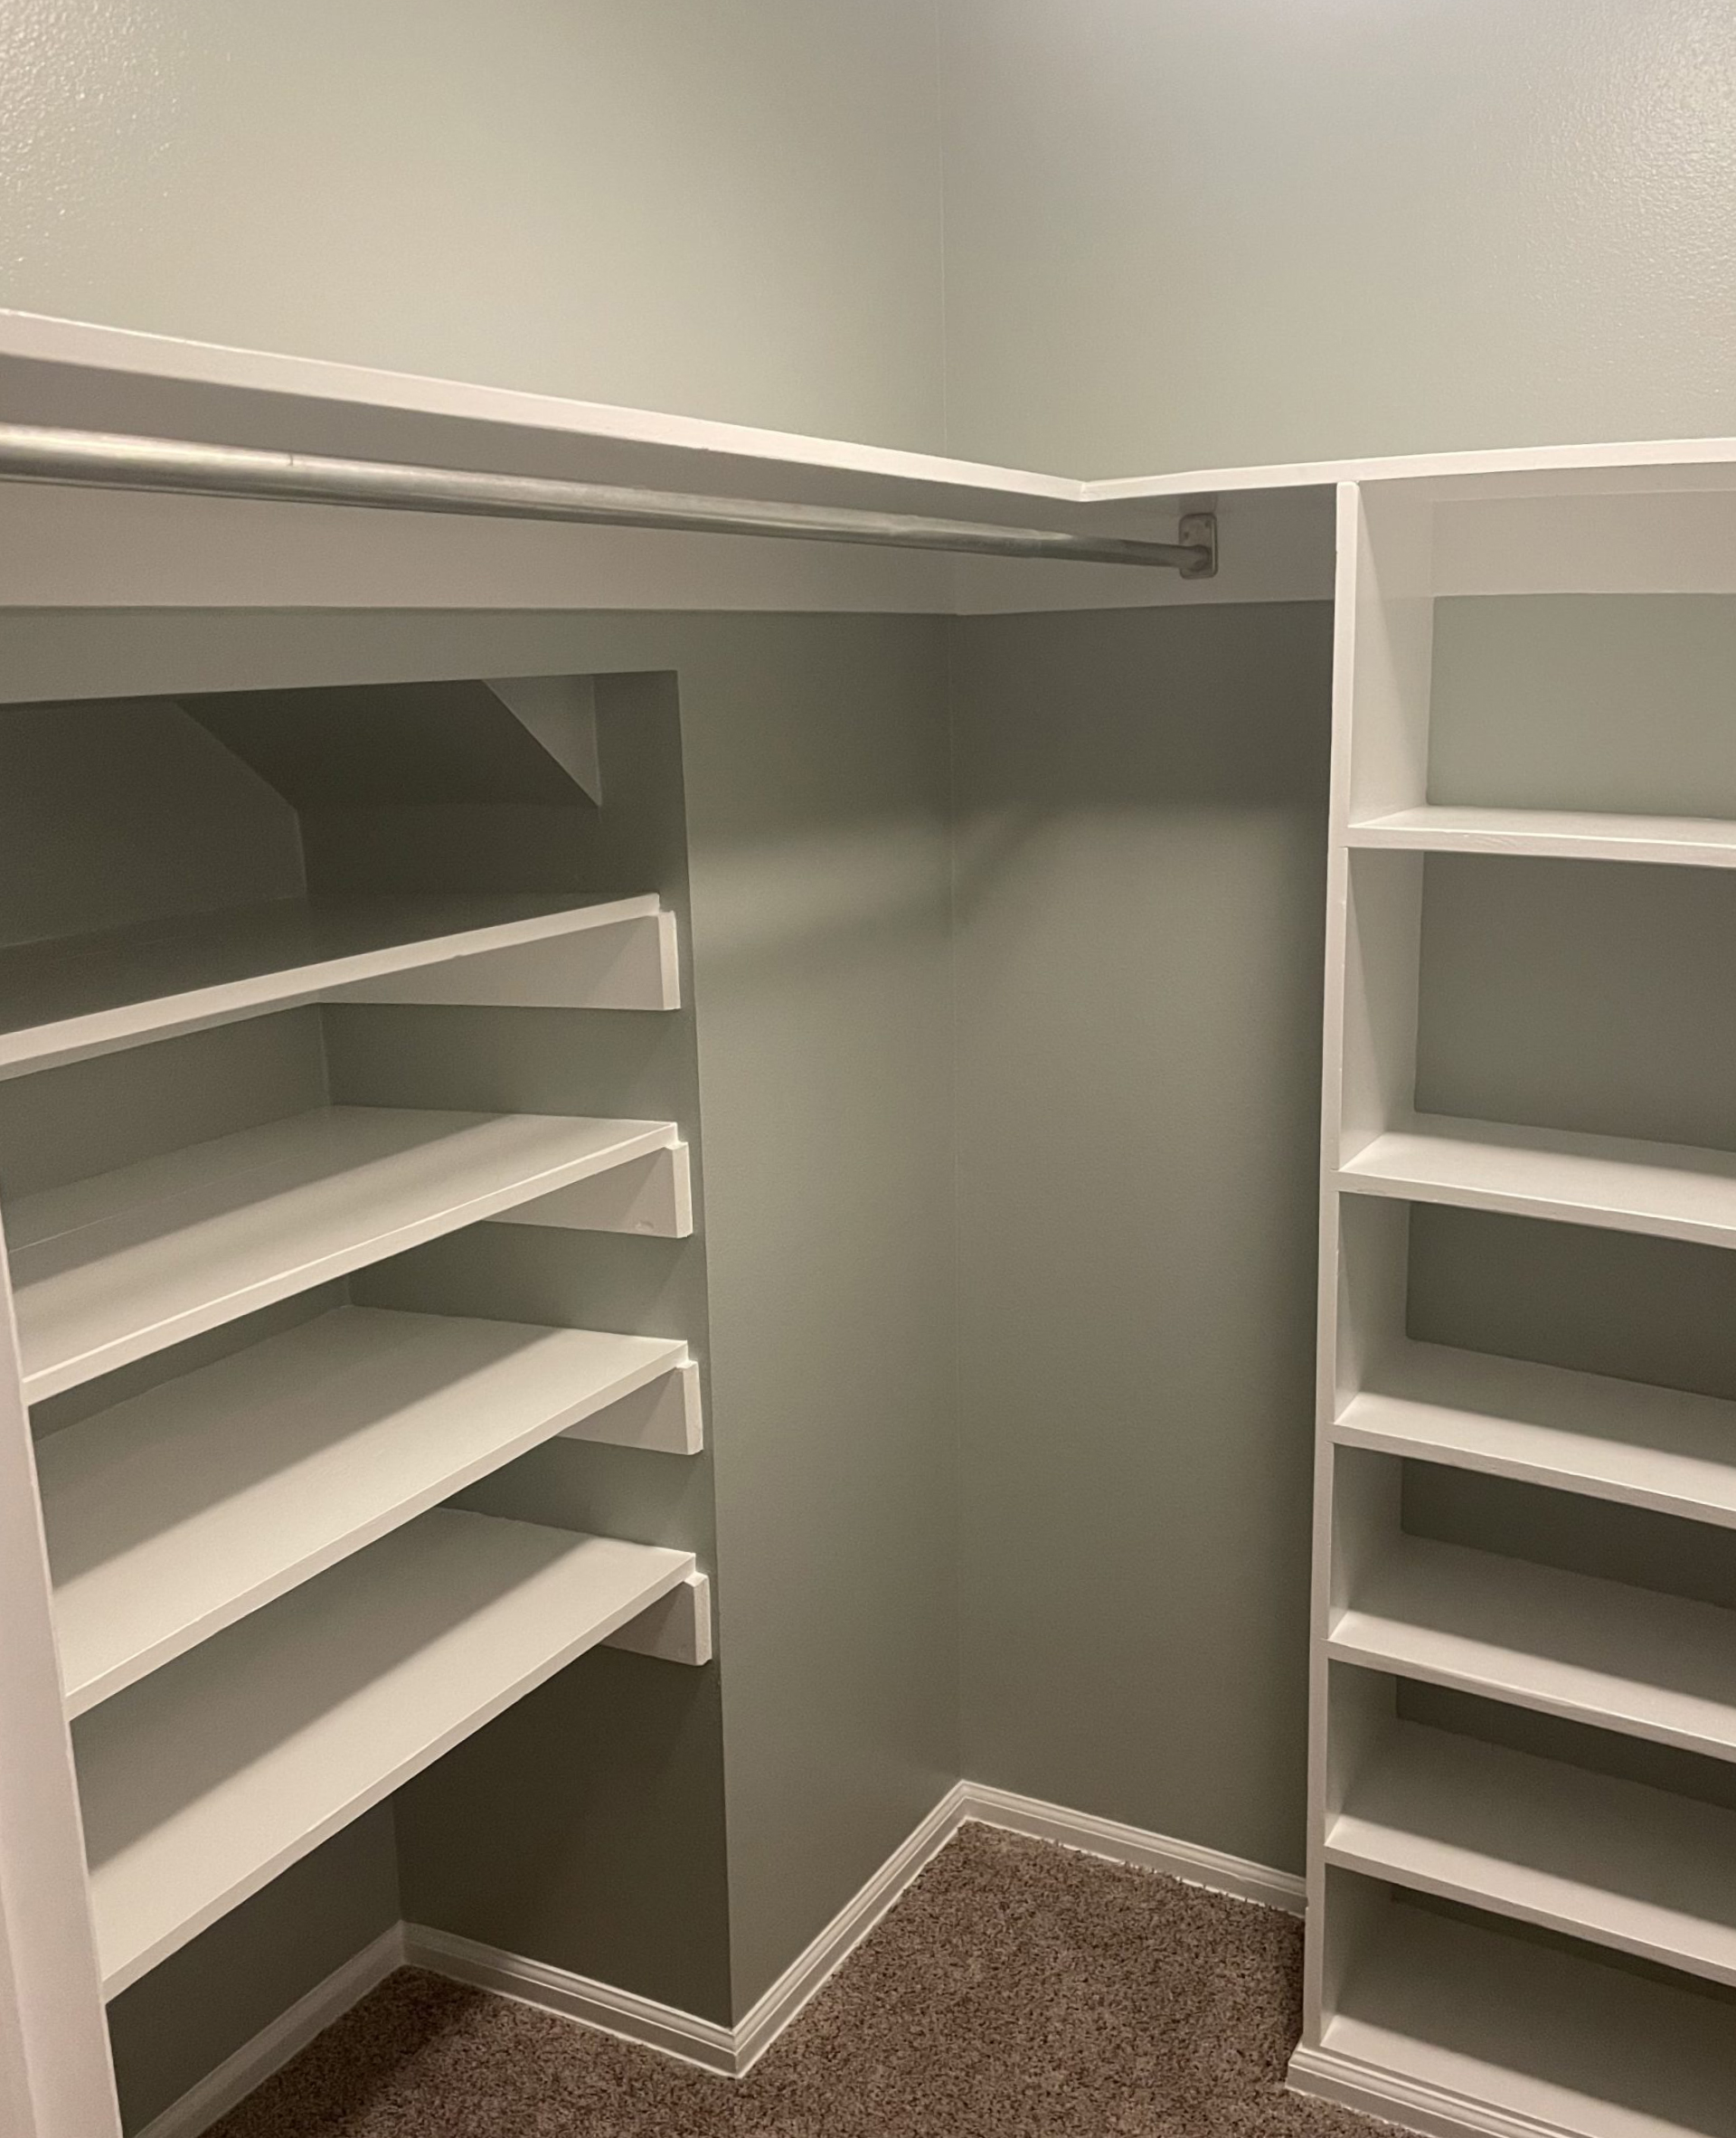 Stained Shelves Repainted After